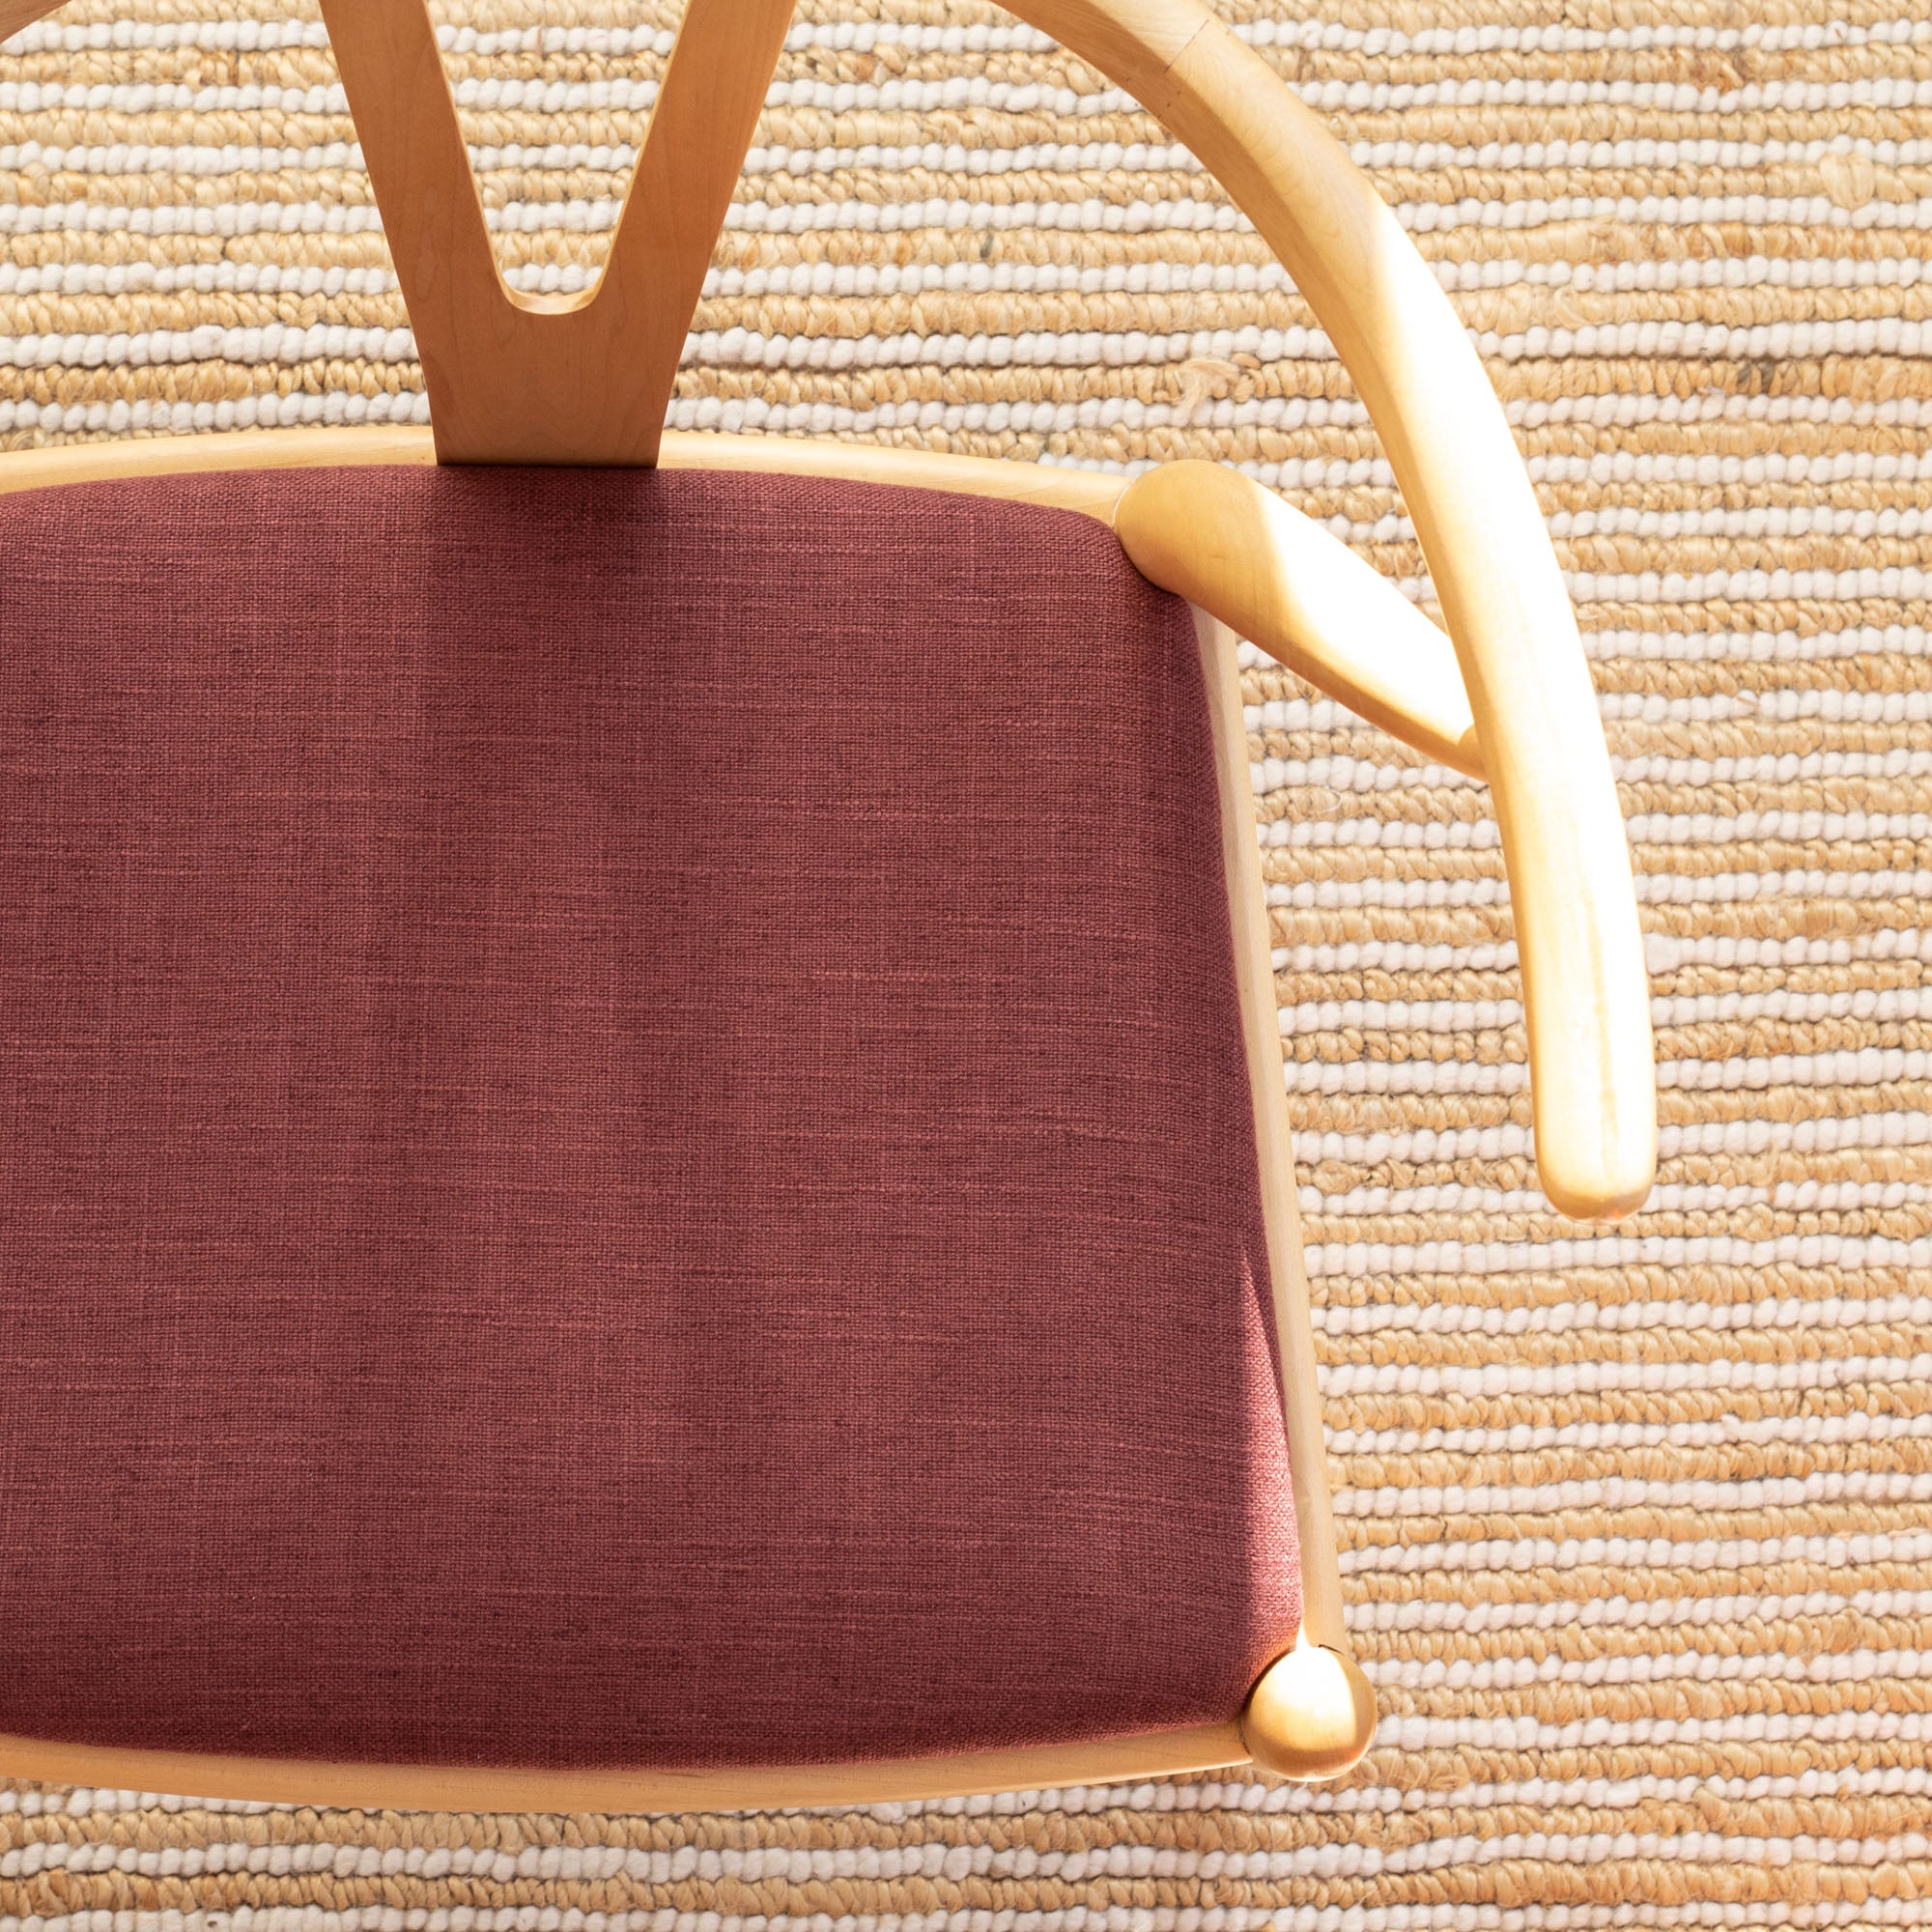 a merlot red upholstered chair seat